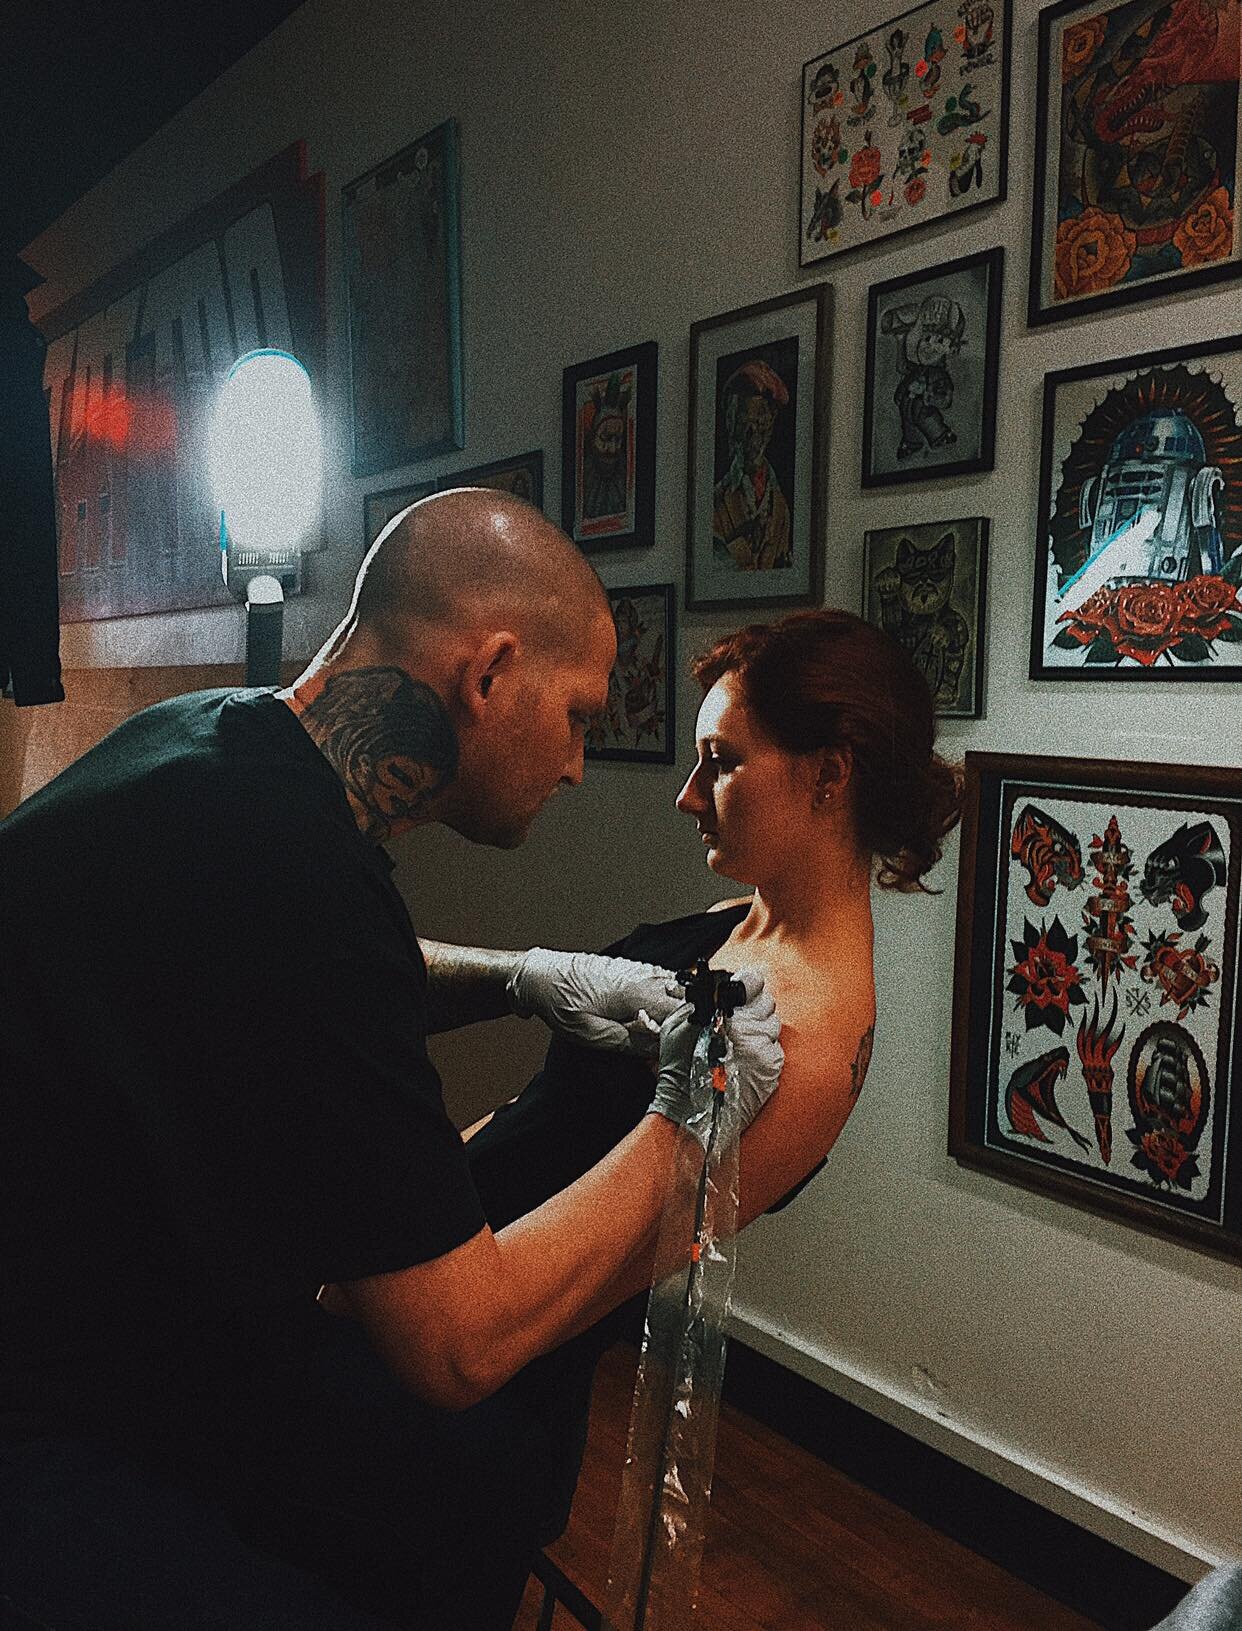 Tattoo parties on rise but some say danger lurks